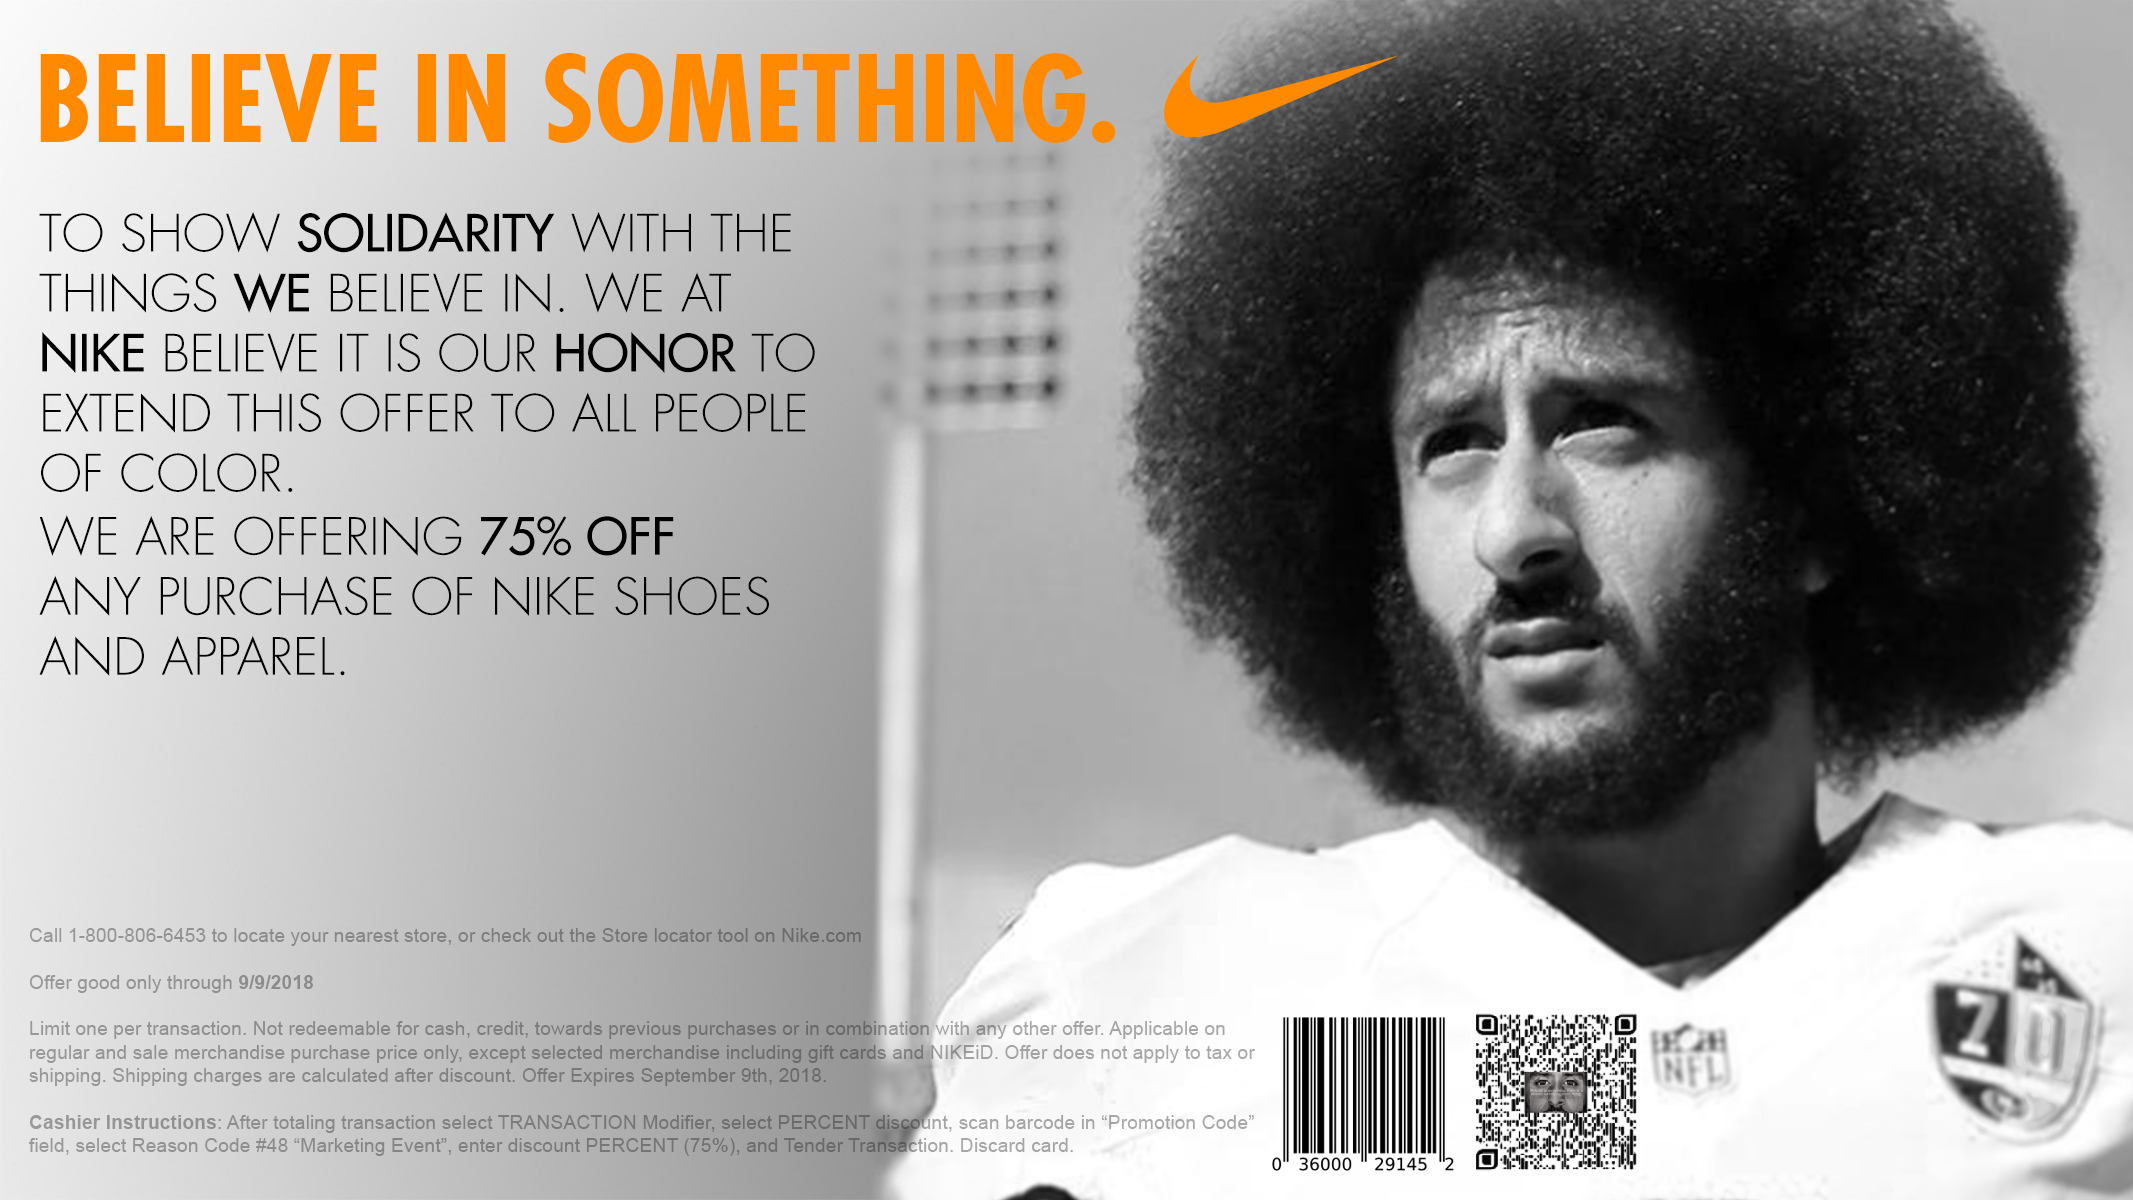 Did Nike Offer 'People of Color' a 75 